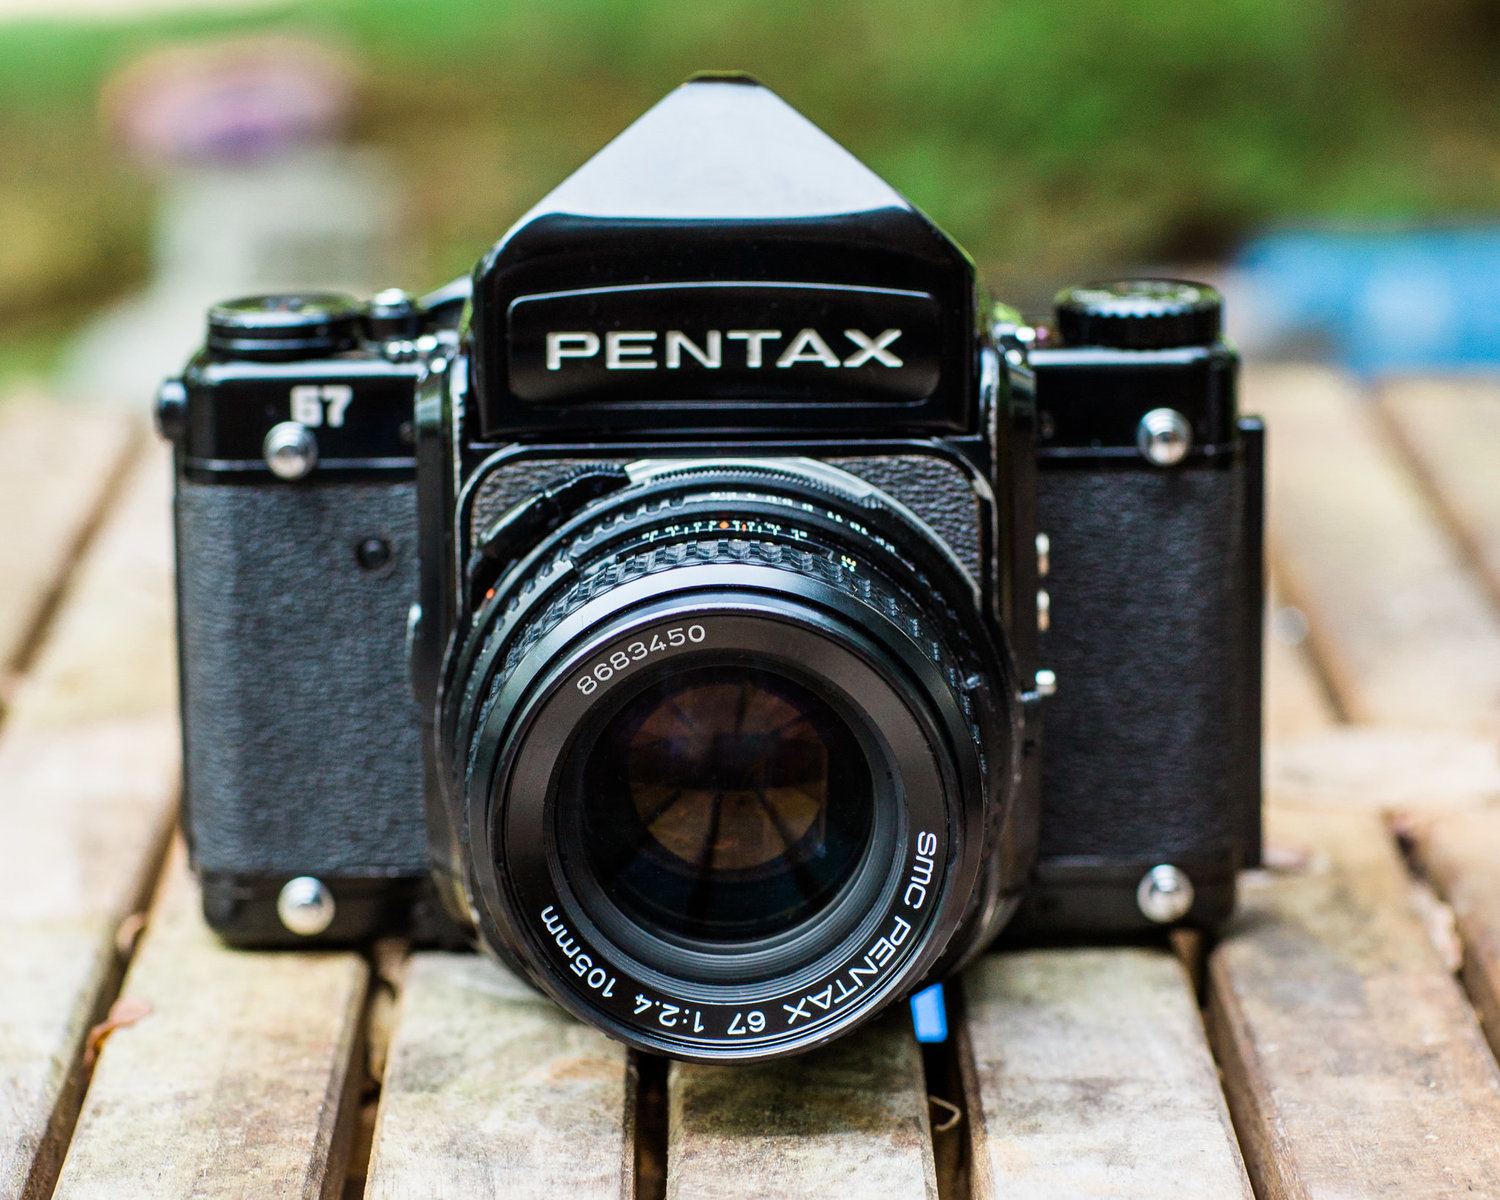 How Can I Tell the Differences Between the Pentax mm f.4 Lens